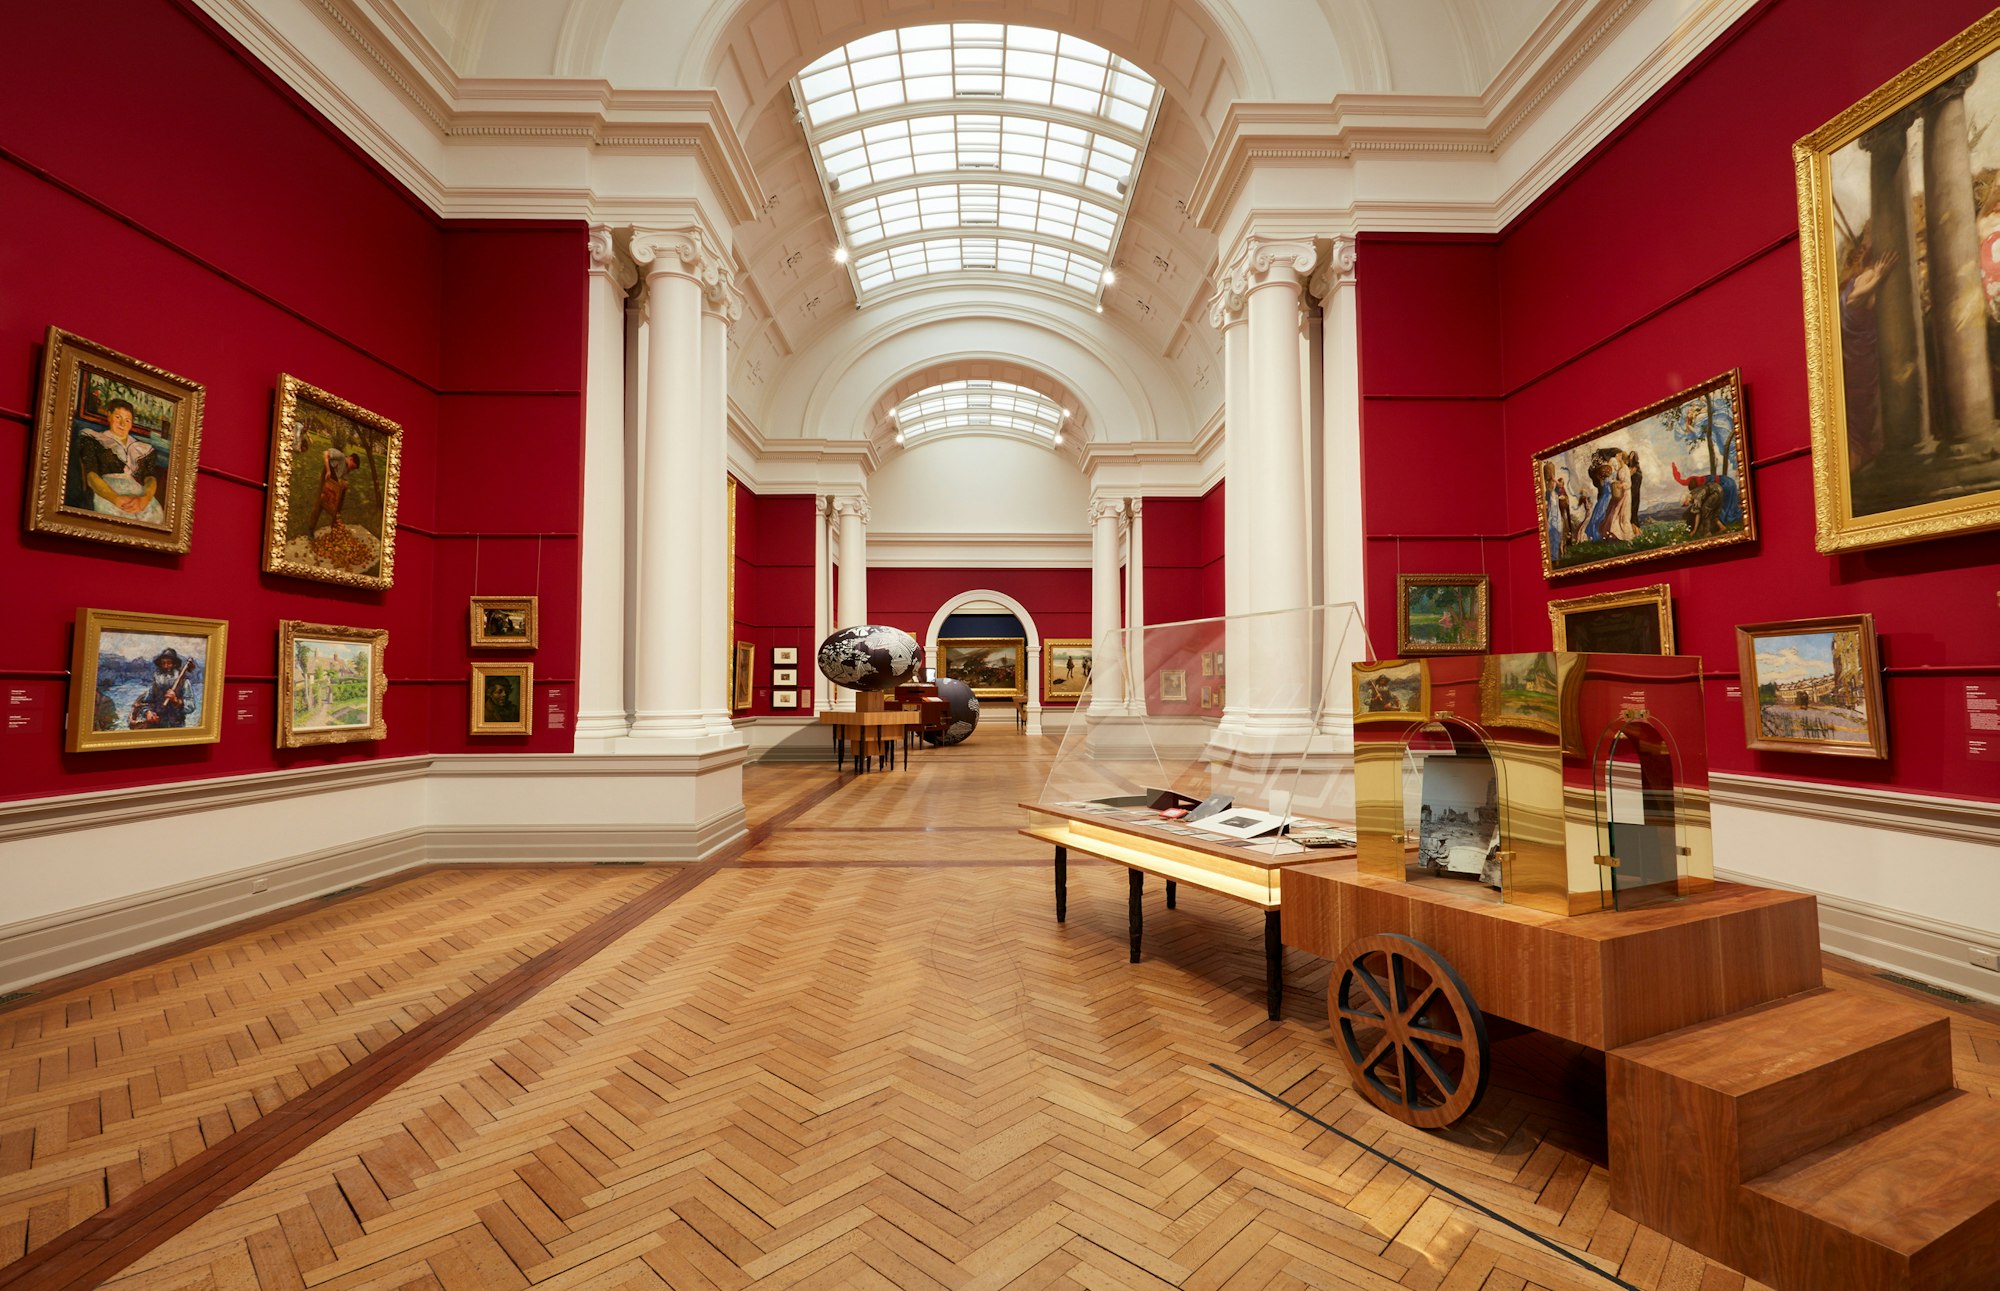 Installation view of the Art Gallery of New South Wales newly opened Grand Courts rehang, which is the first phase of a full reinstallation of the Art Gallery’s Australian and International art collection across gallery spaces, December 2021. 